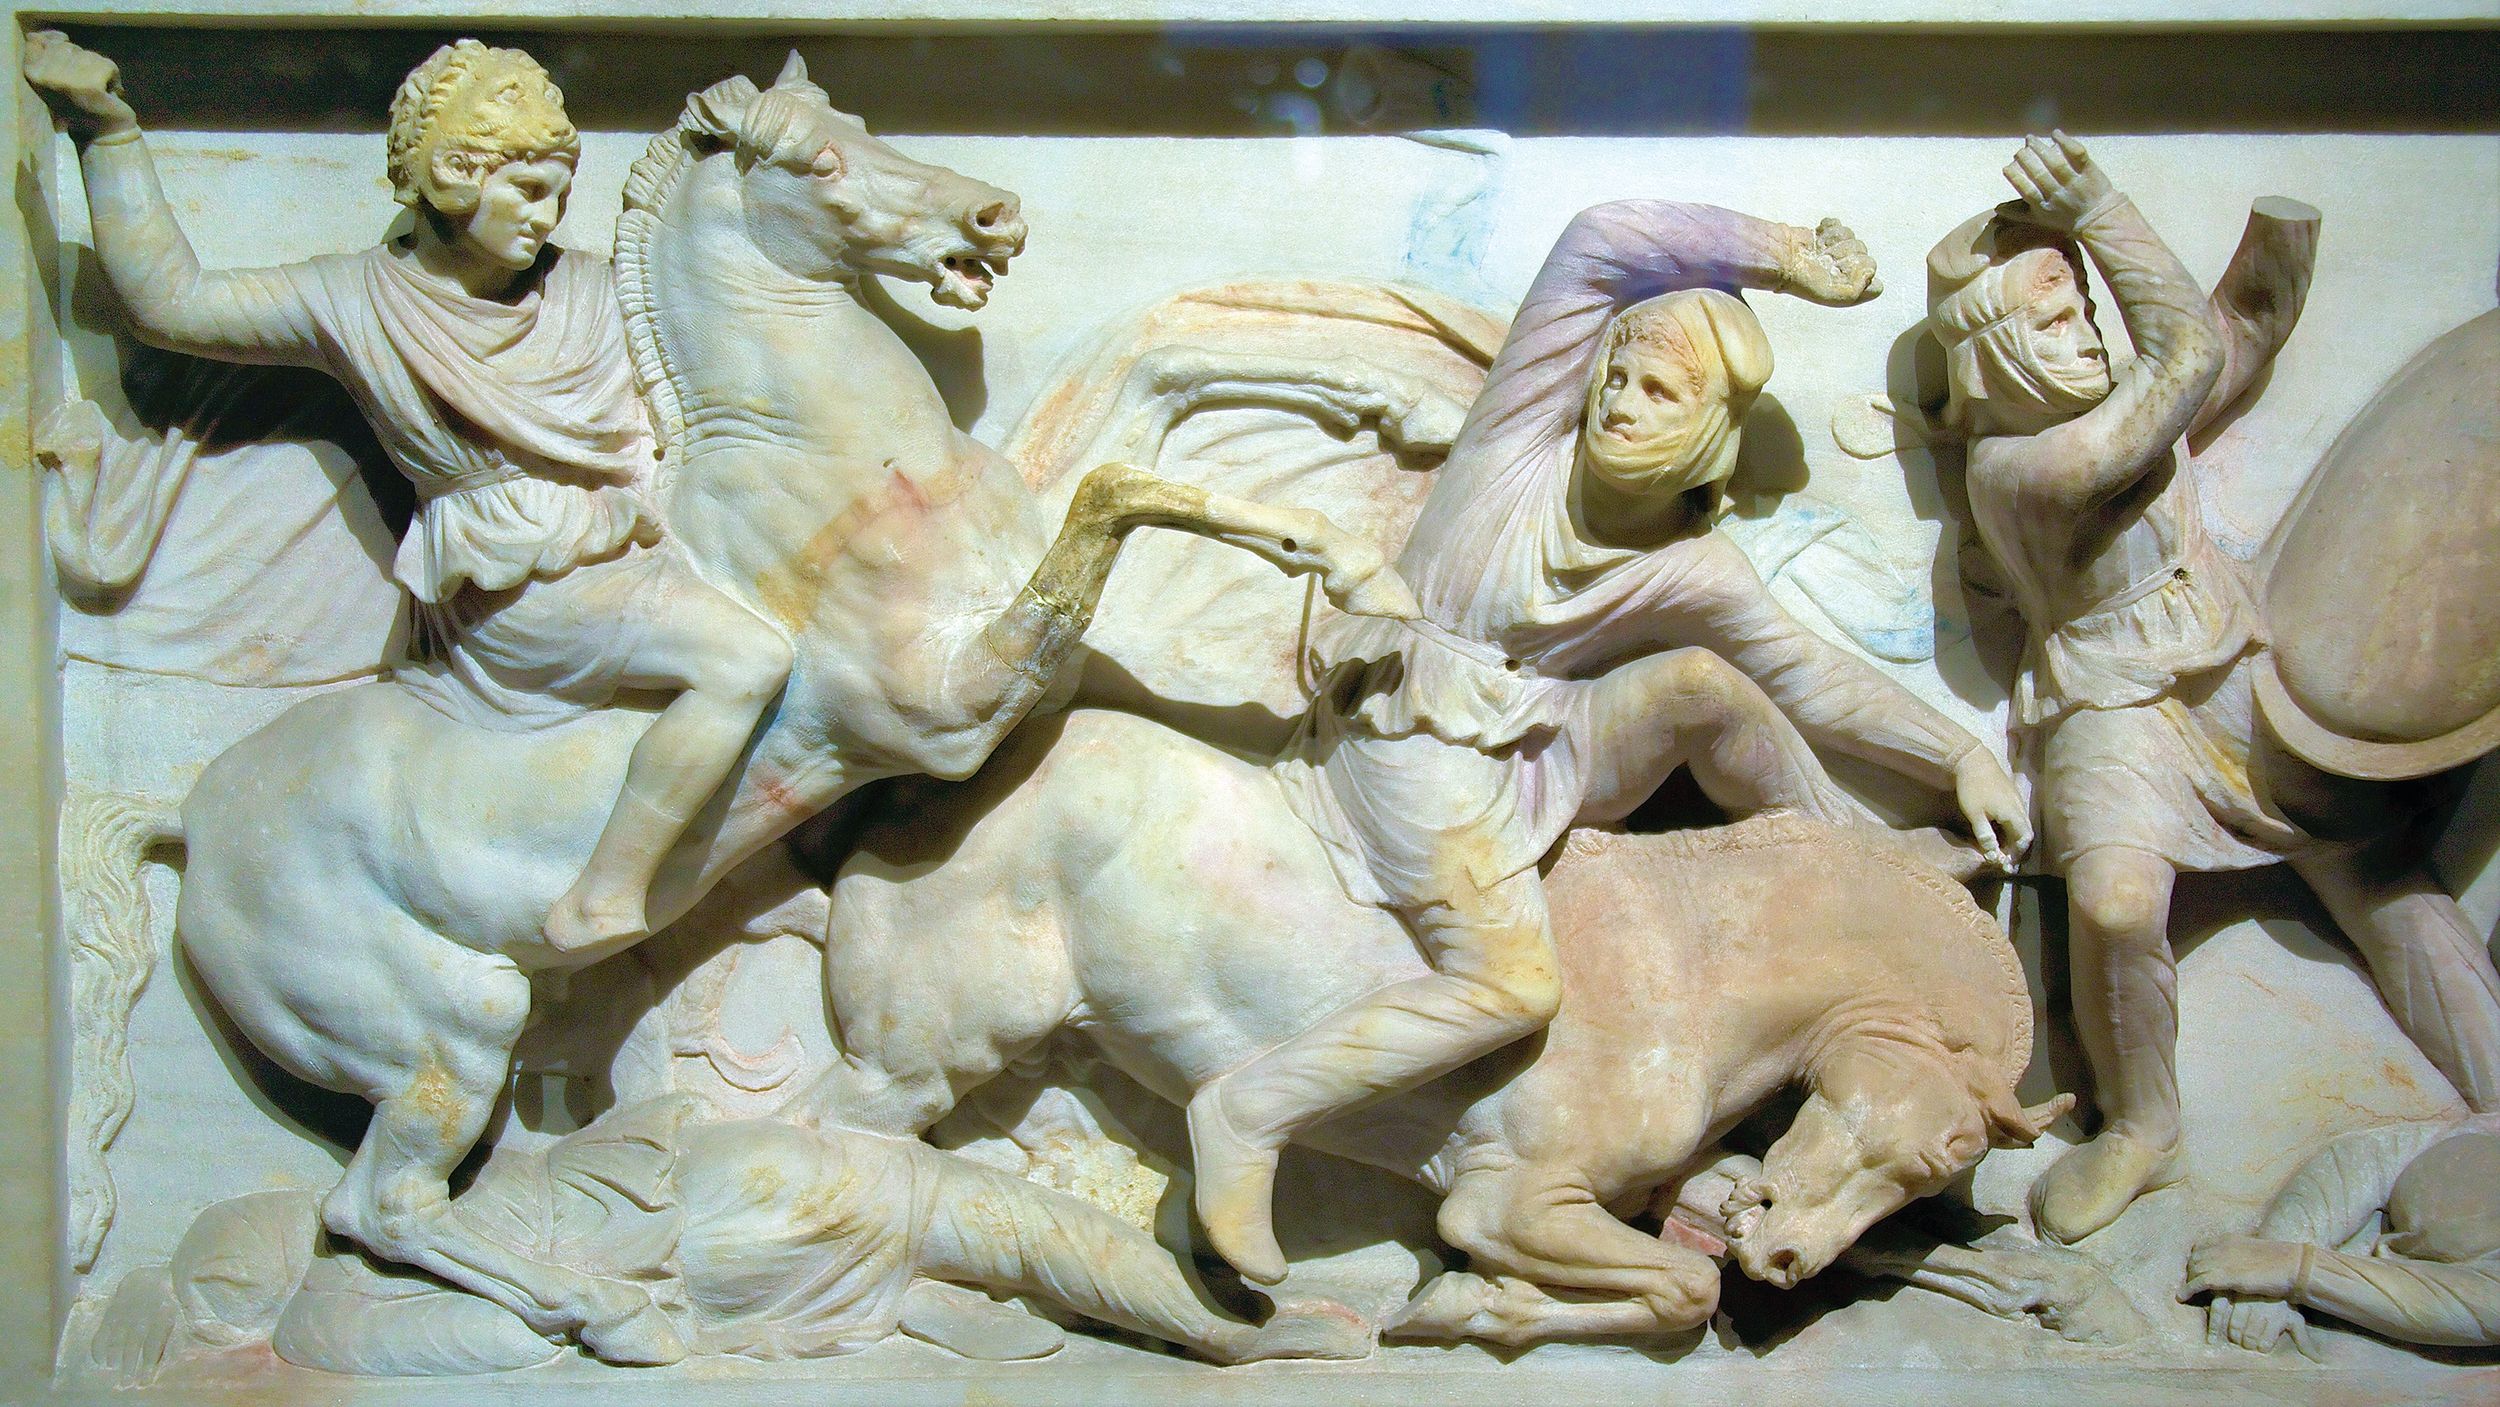 The marble Alexander Sarcophagus from about the time of Alexander, depicts him wearing a lion’s head helmet, in combat against the army of Darius III.